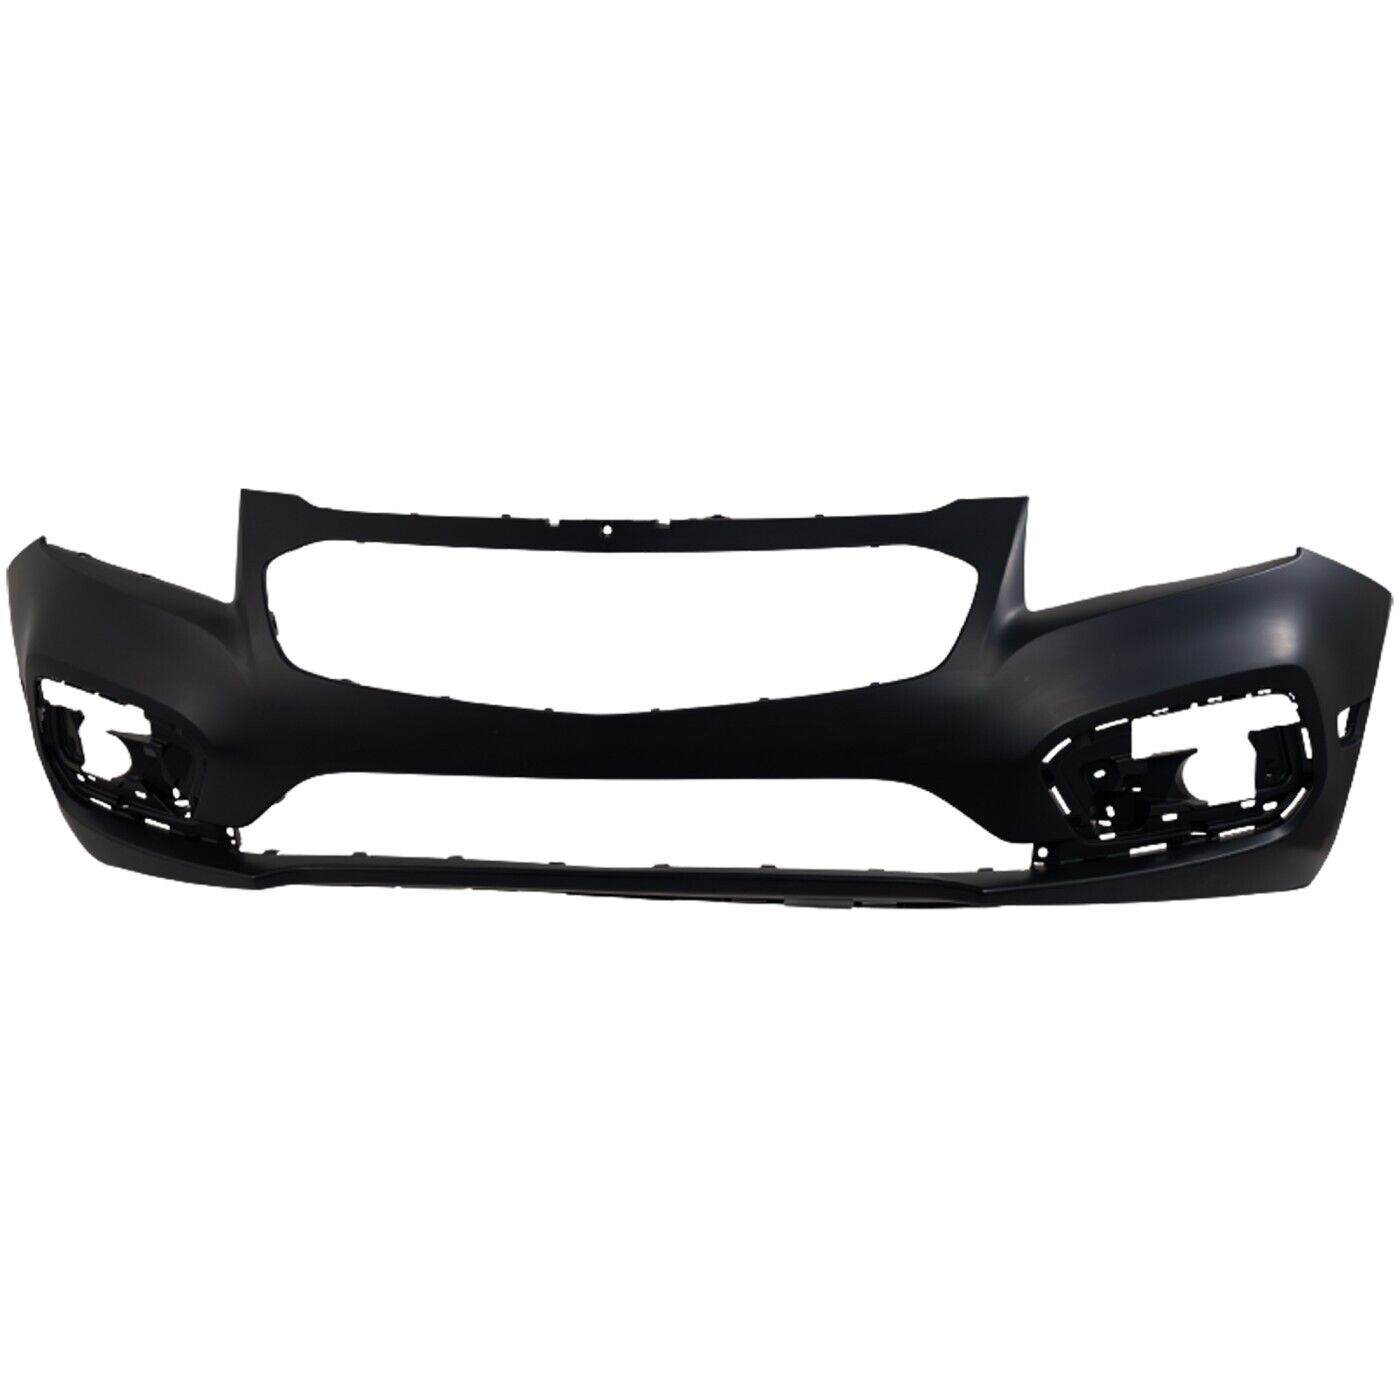 Front Bumper Cover For 2015 Chevrolet Cruze 2016 Cruze Limited Primed 94525910